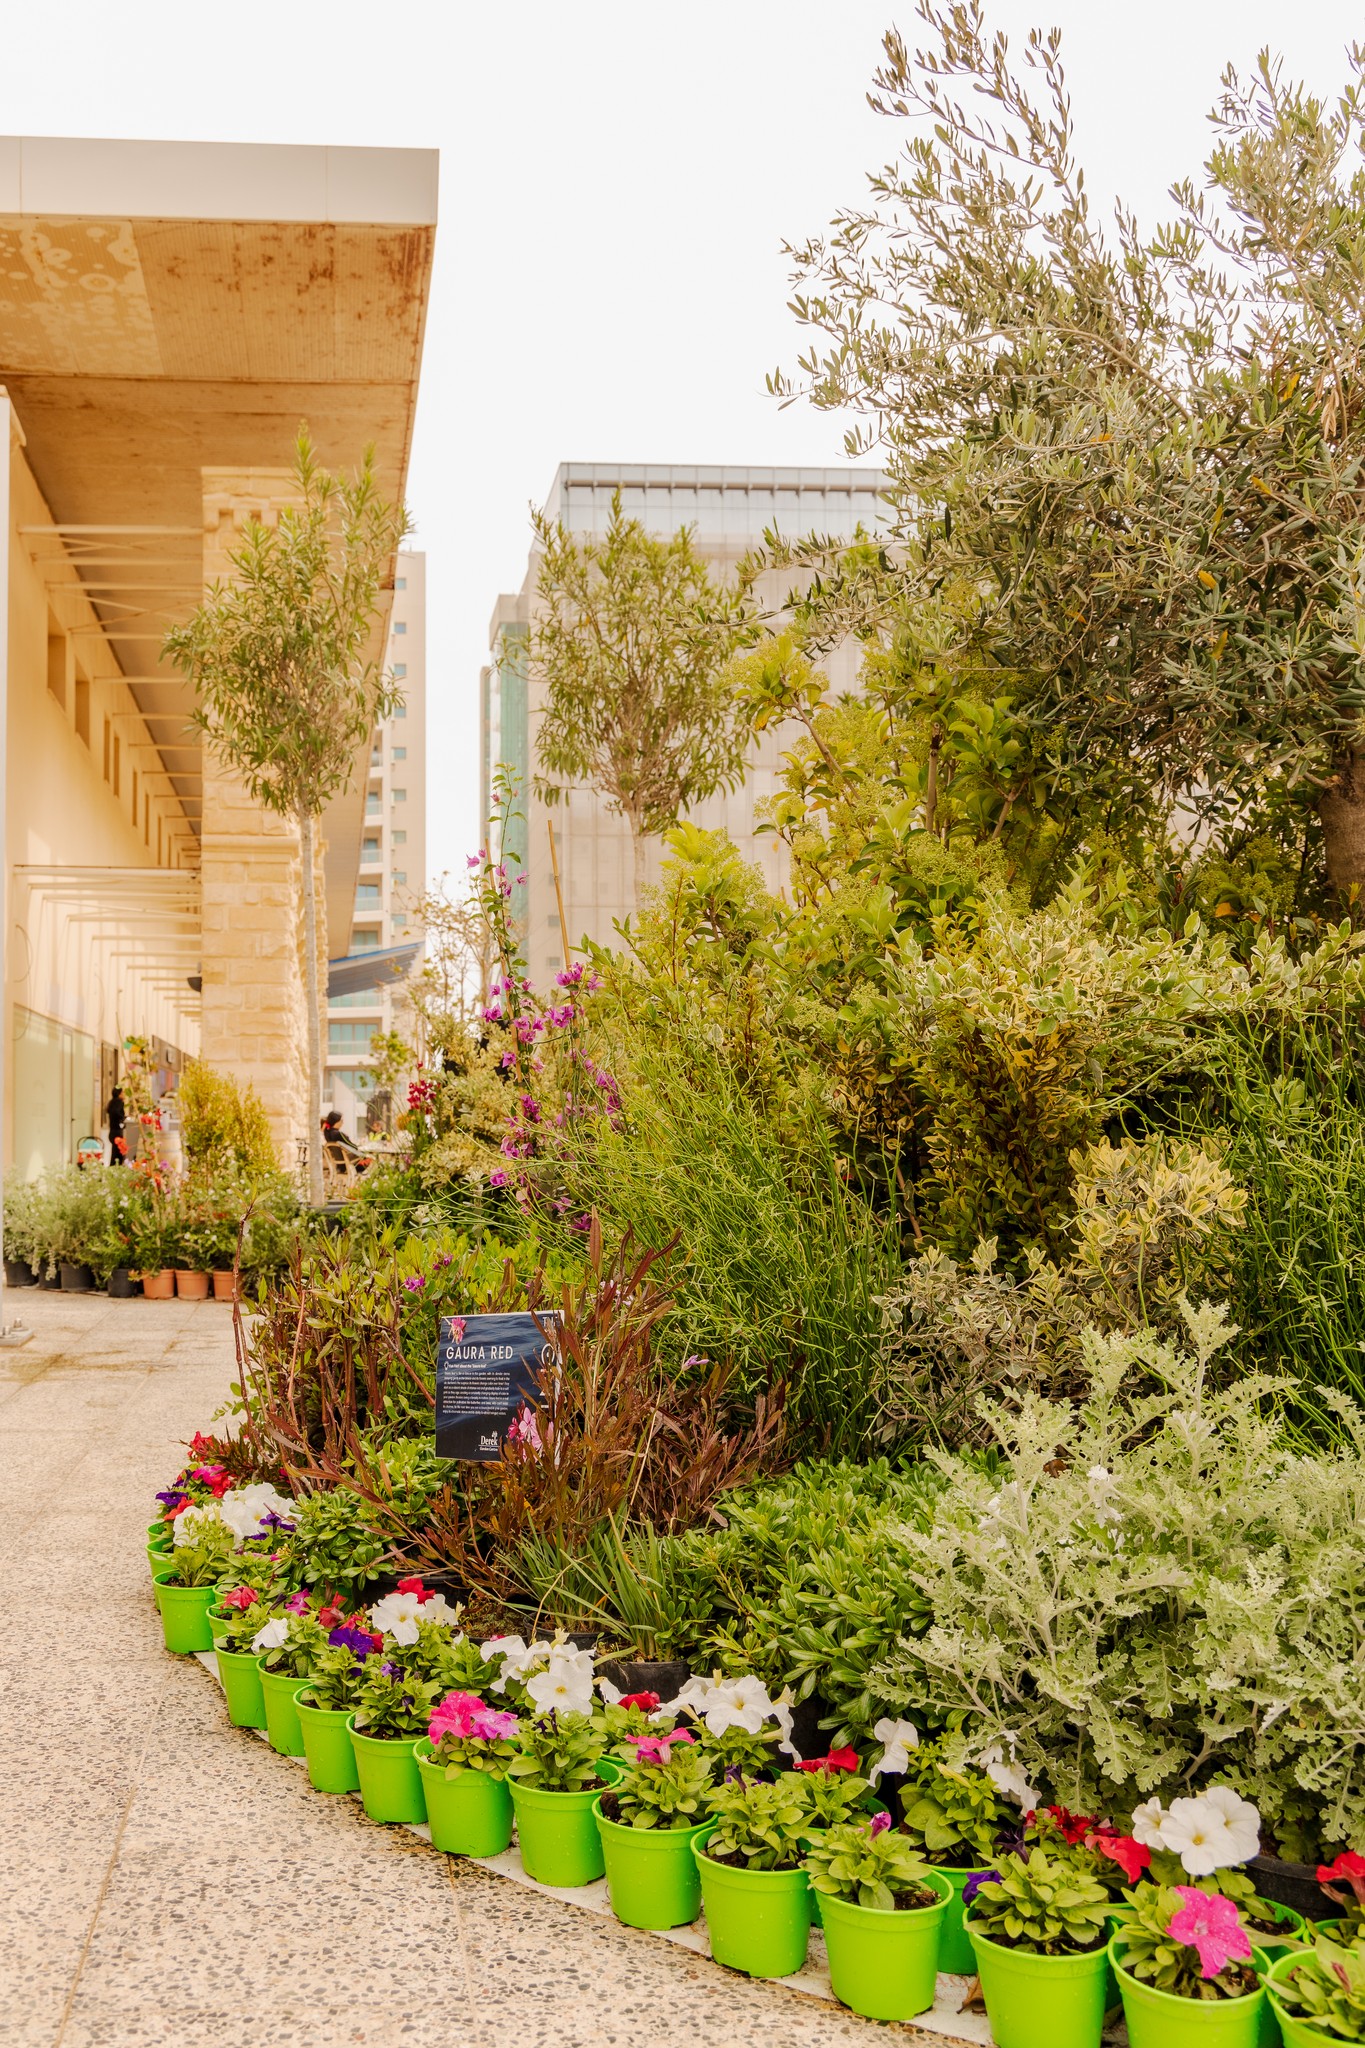 The Point Urban Oasis: A community green space in Tigne Point